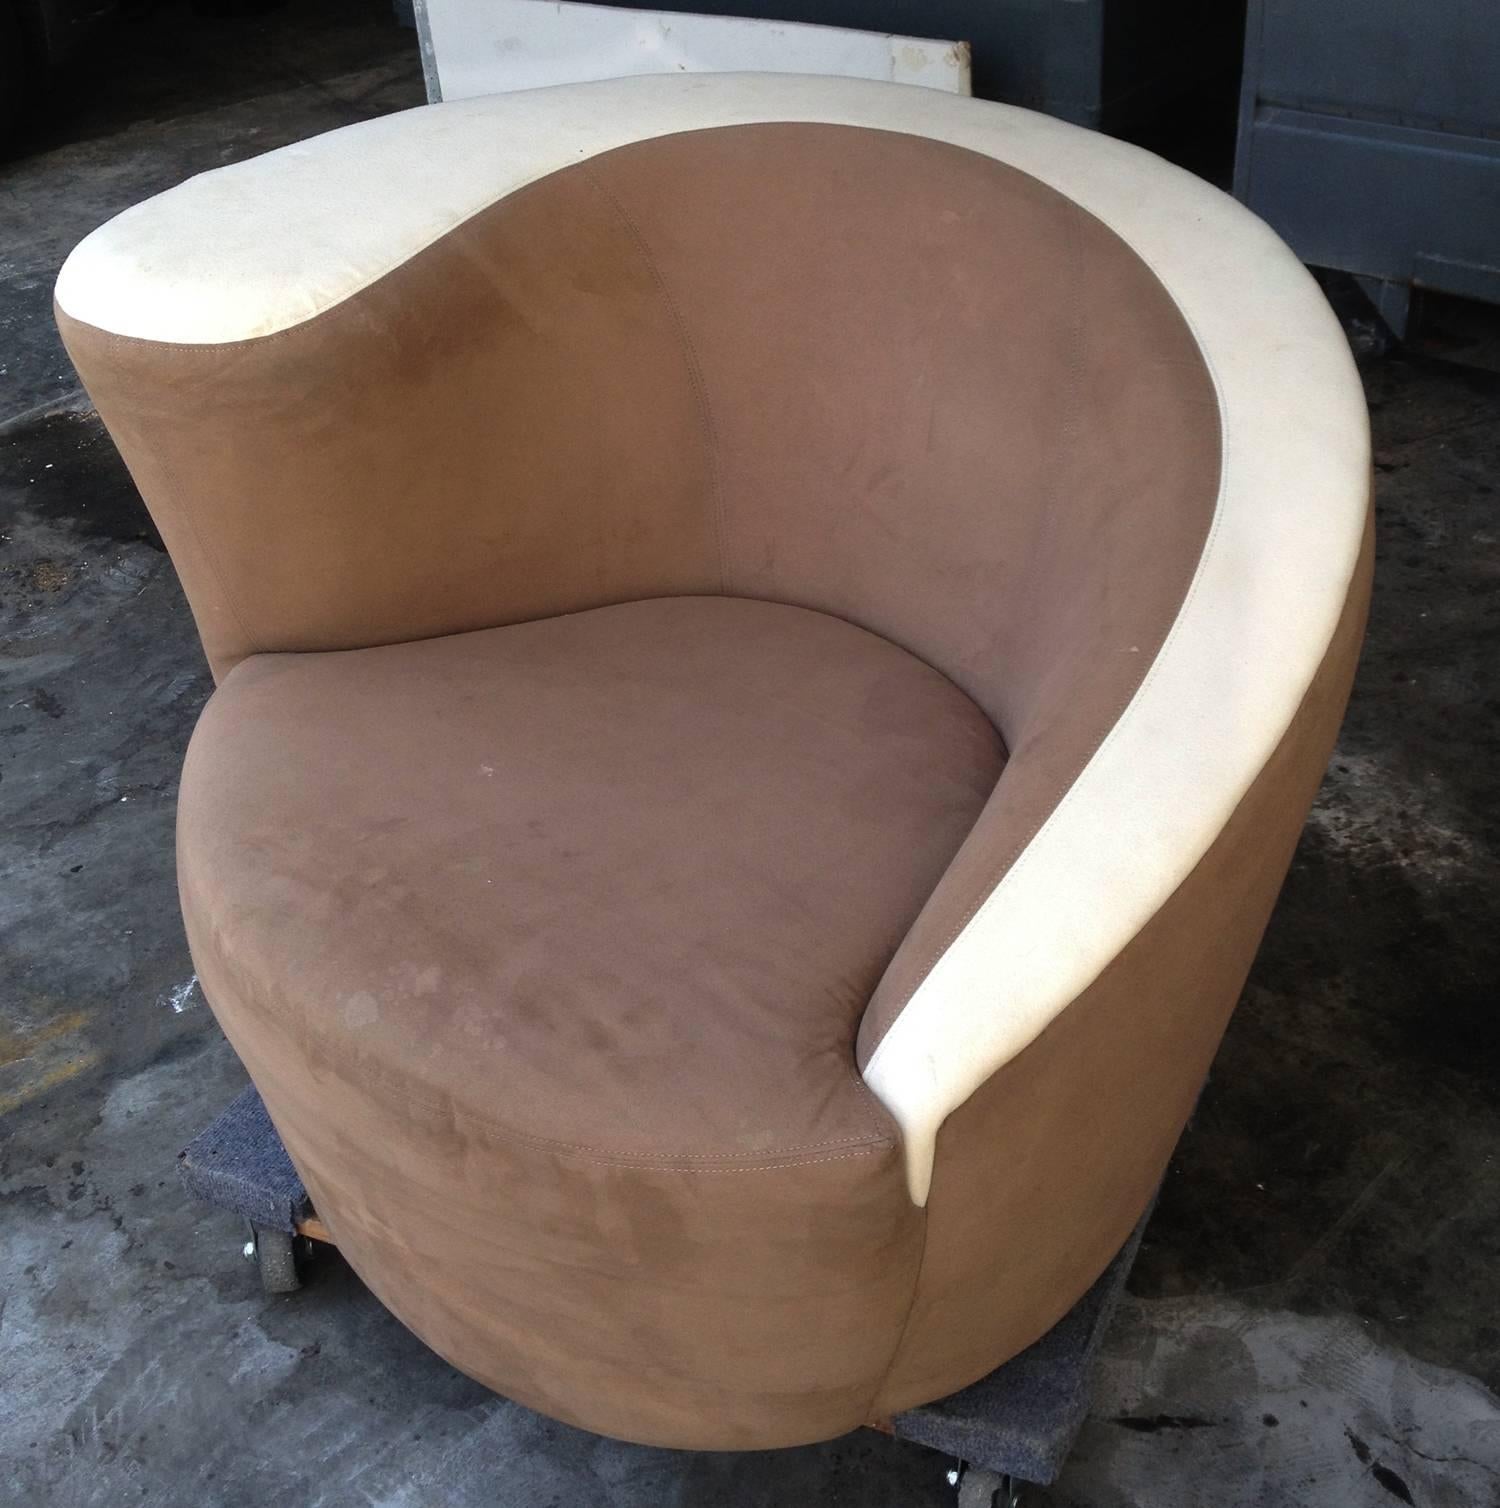 Vladimir Kagan designed Nautilus lounge chair upholstered in a chocolate brown microfiber fabric with a cream color stripe along the top which matches the Vladimir Kagan Serpentine sofa we have listed (this was purchased as a set).
Both, the chair